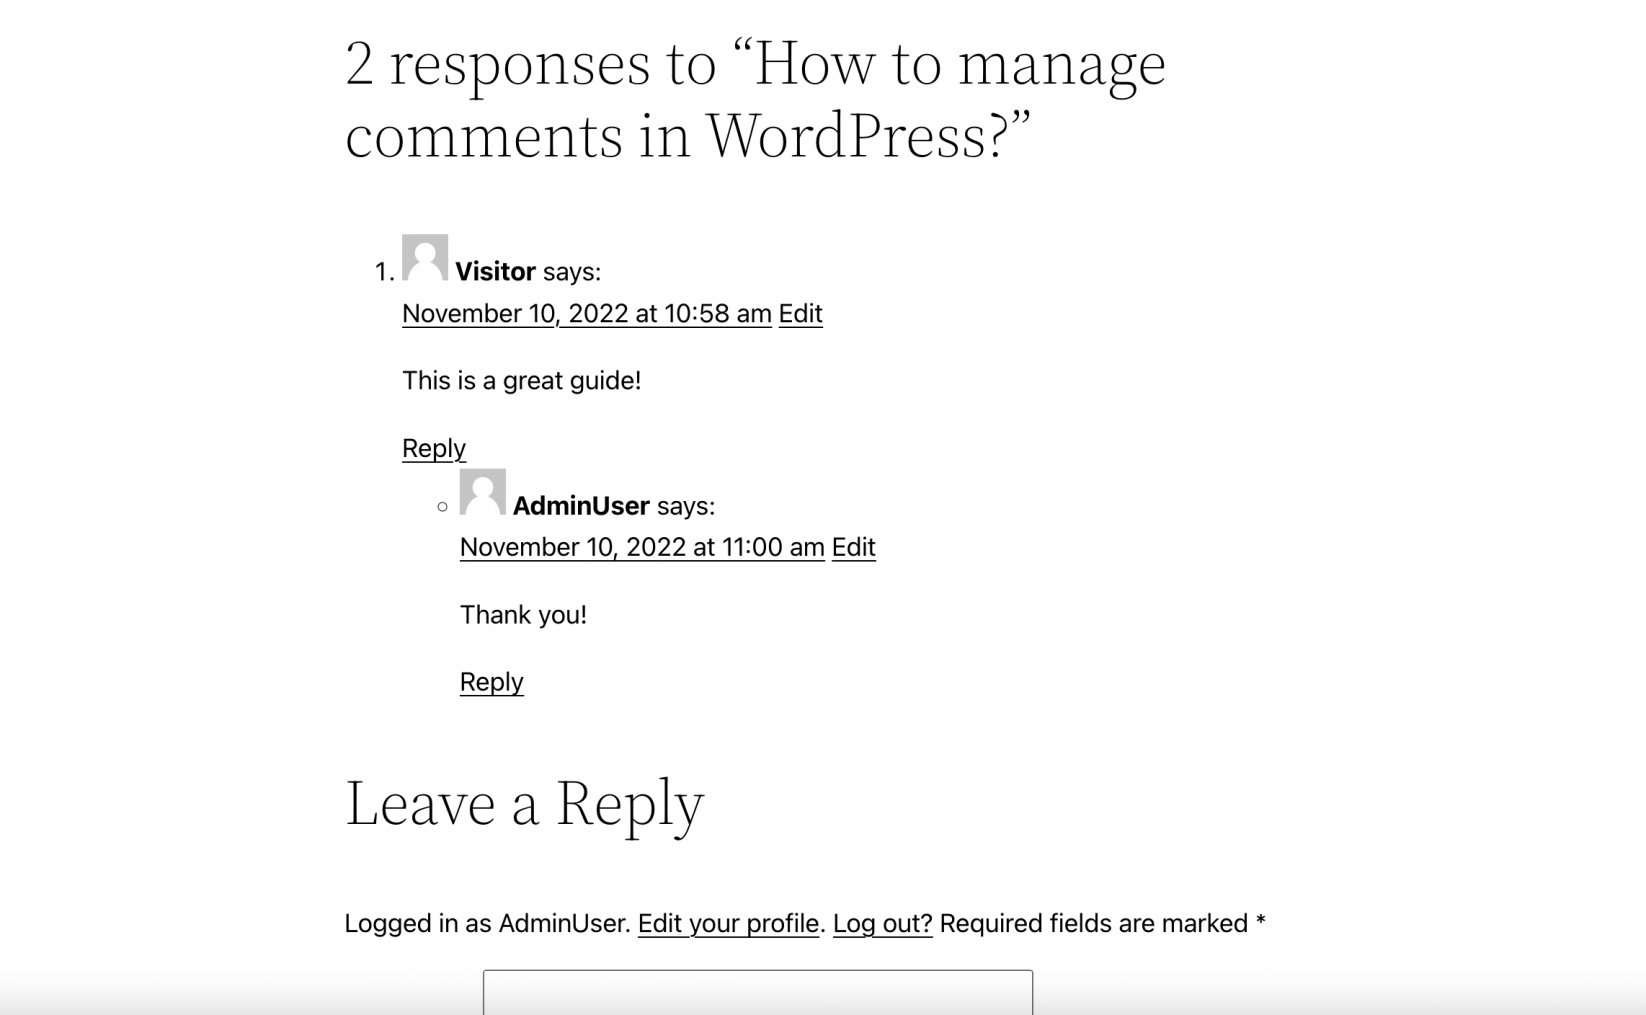 Comments on a WordPress website